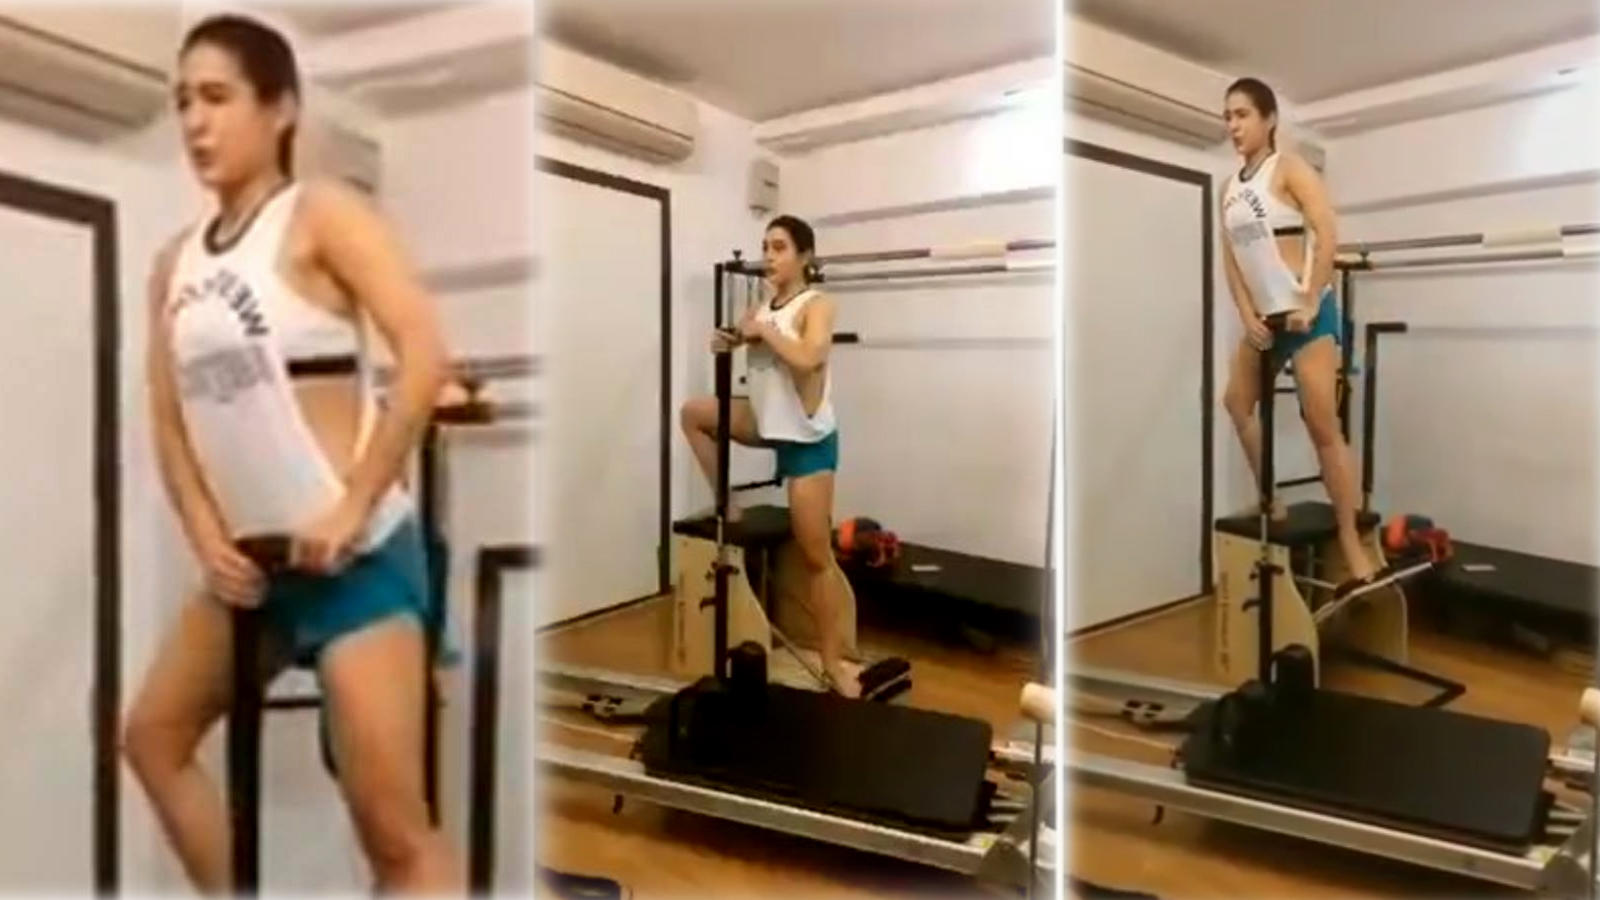 Watch Sara Ali Khan S Impressive Workout Video Will Convince You To Hit The Gym Asap